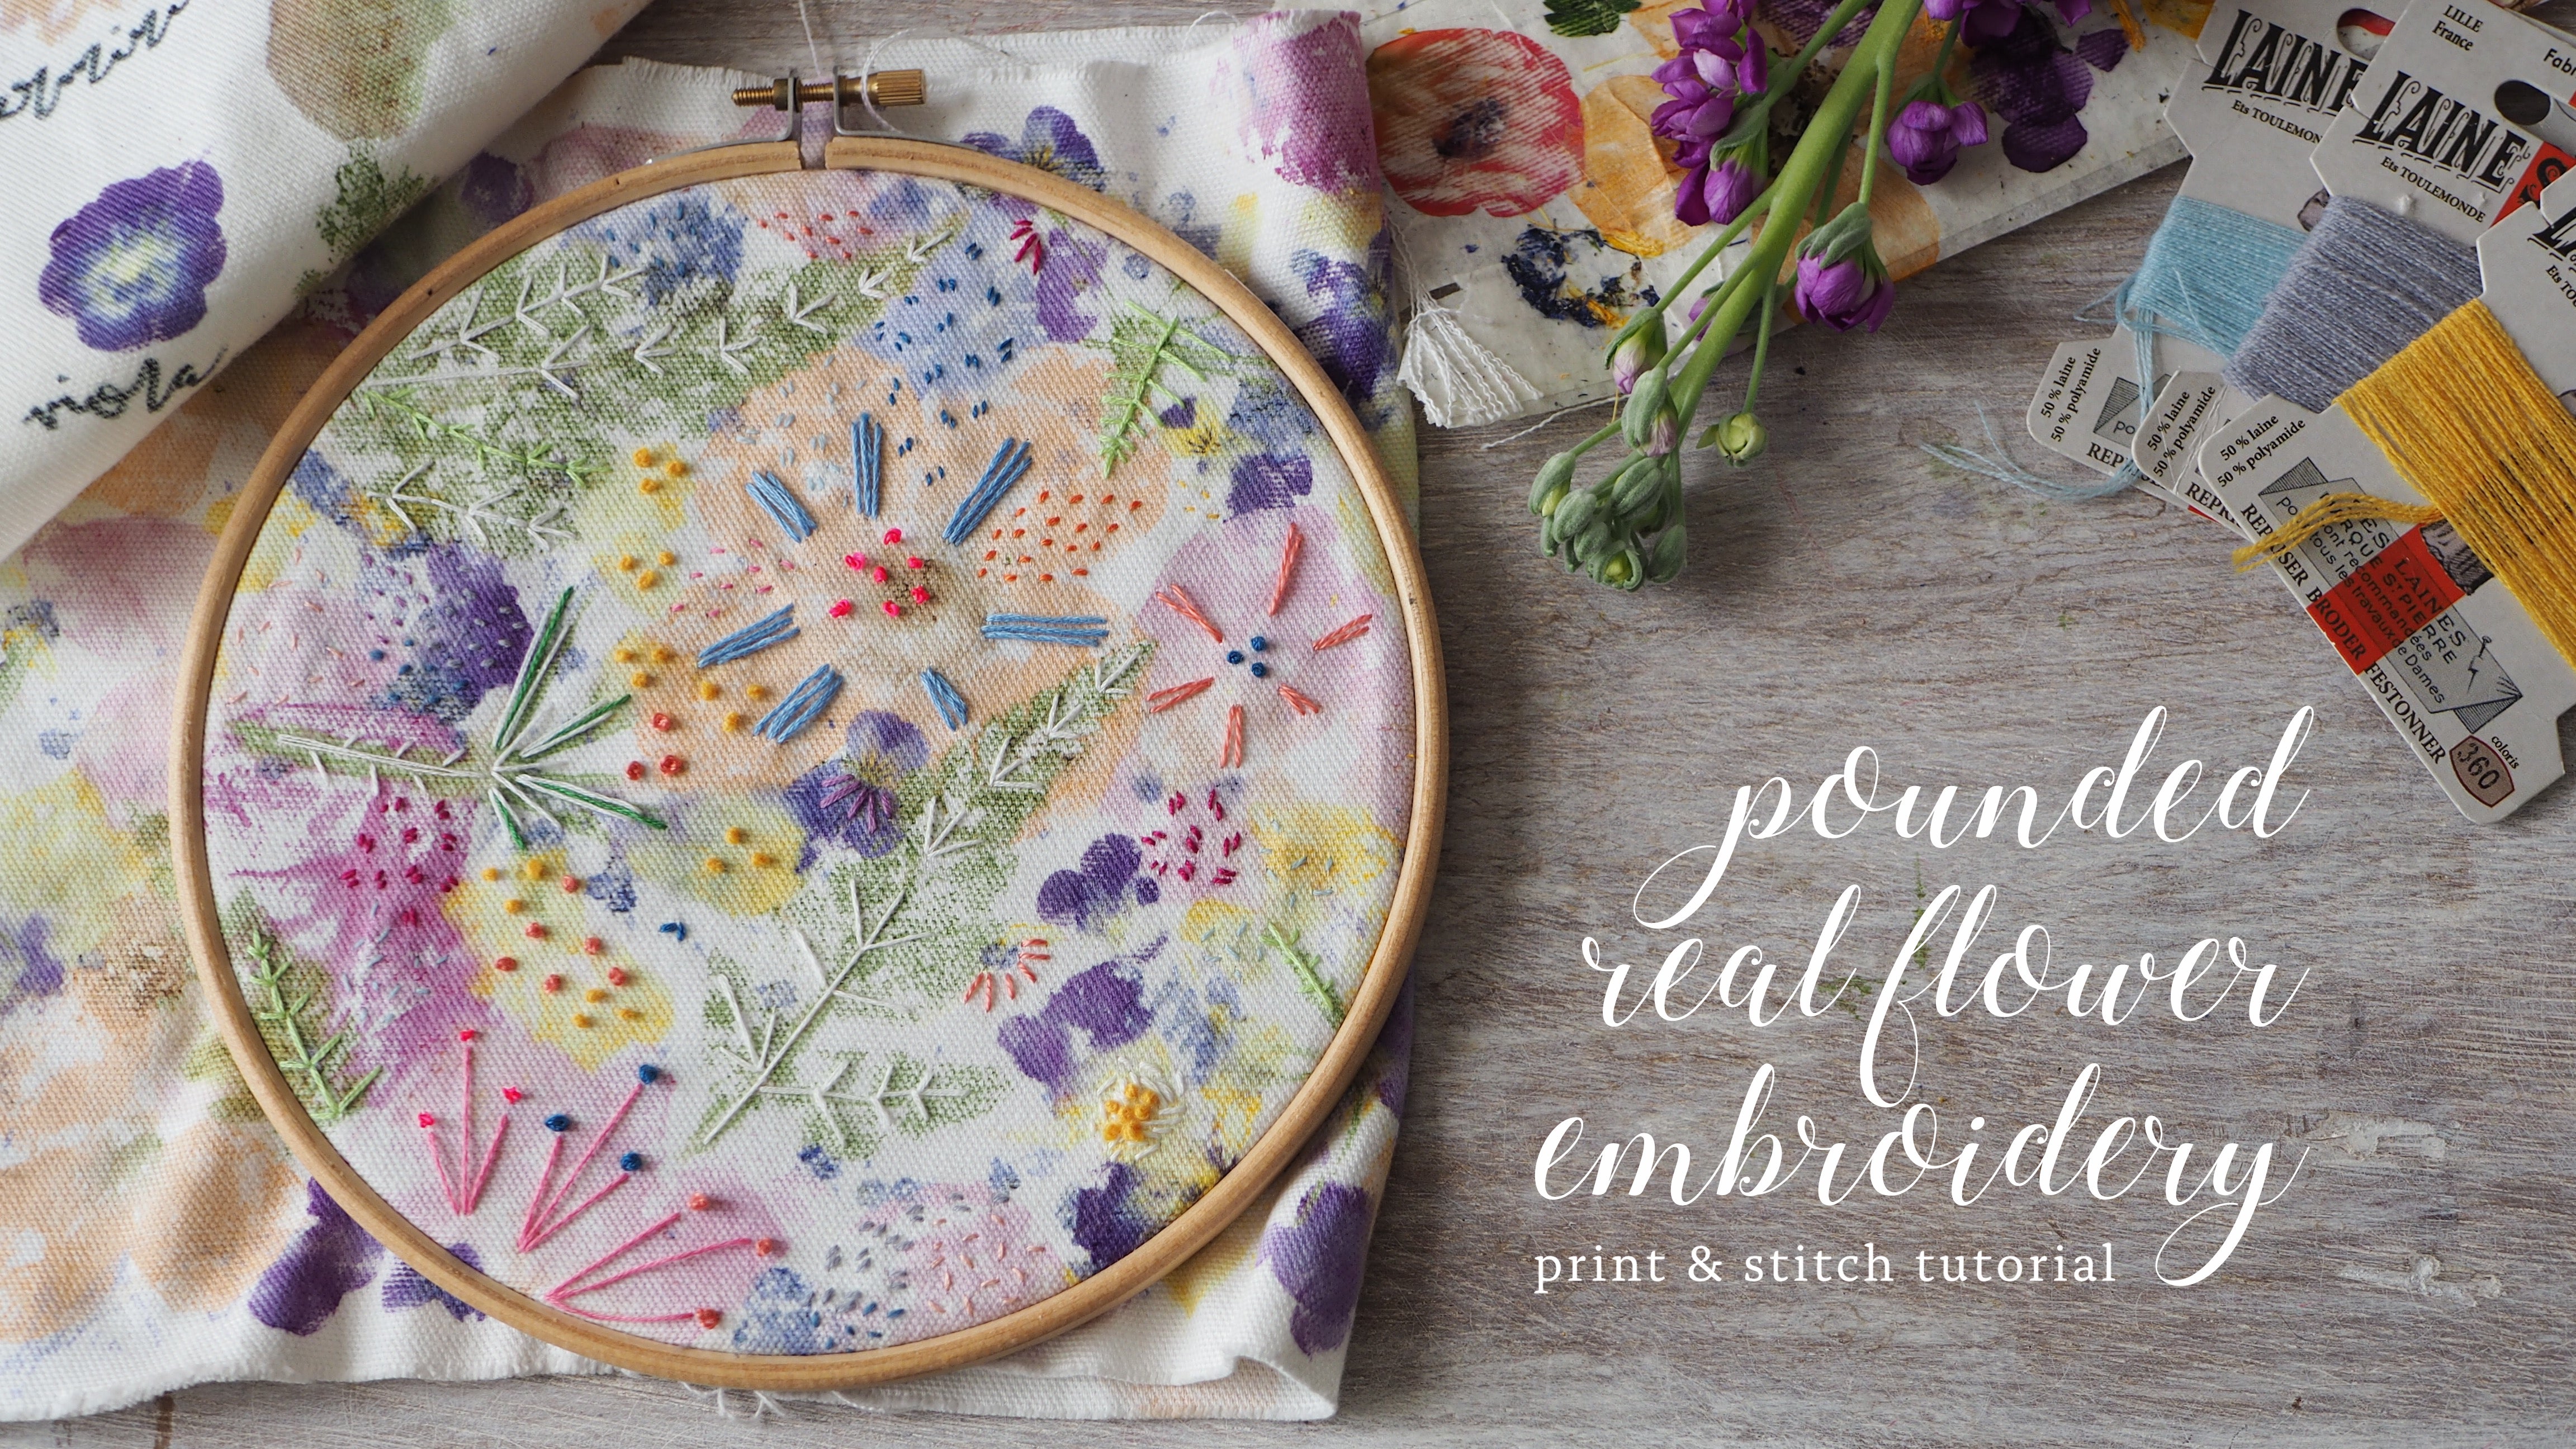 How To Make A Pounded Flower Embroidery